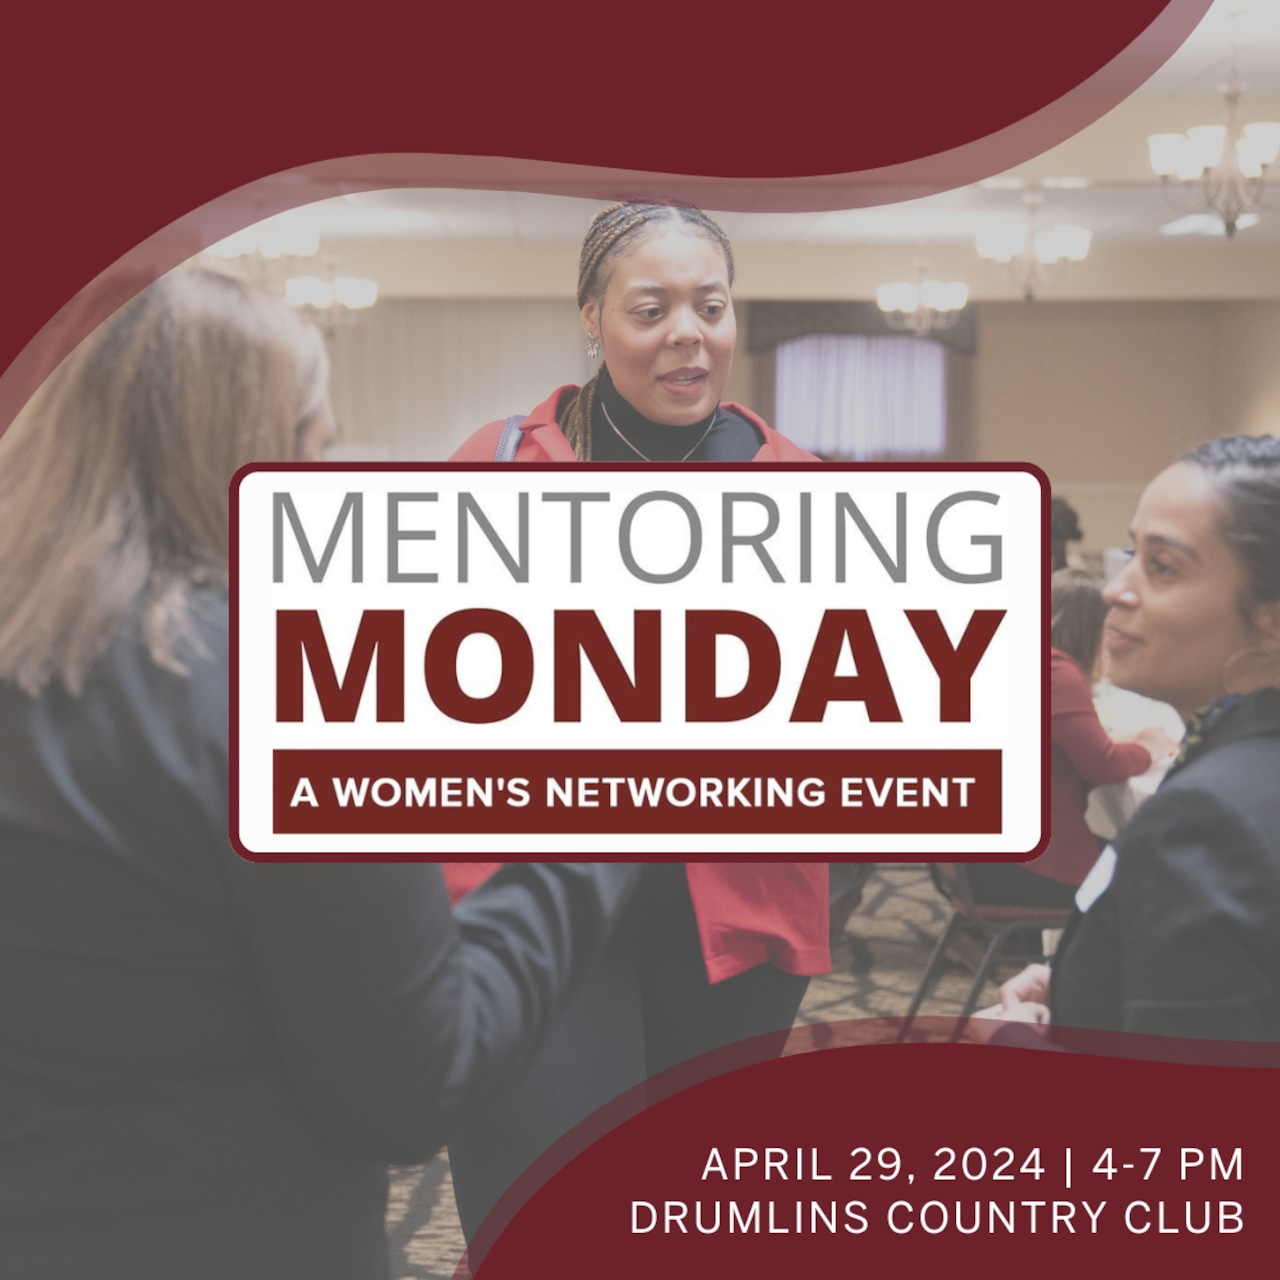 Build professional connections through targeted one-on-one networking at Mentoring Monday [Video]